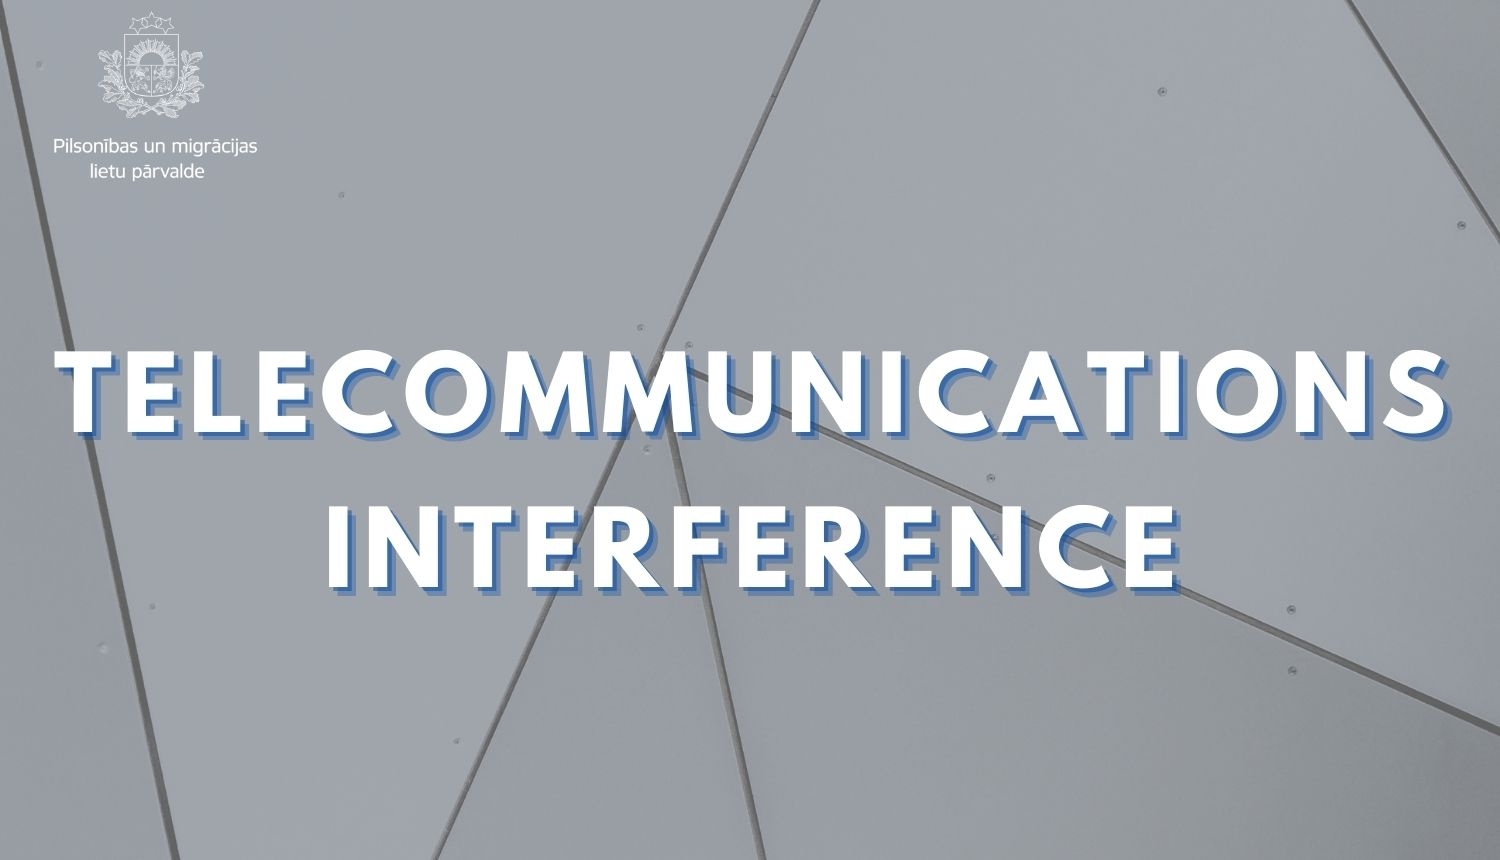 Text: Telecommunications interderence